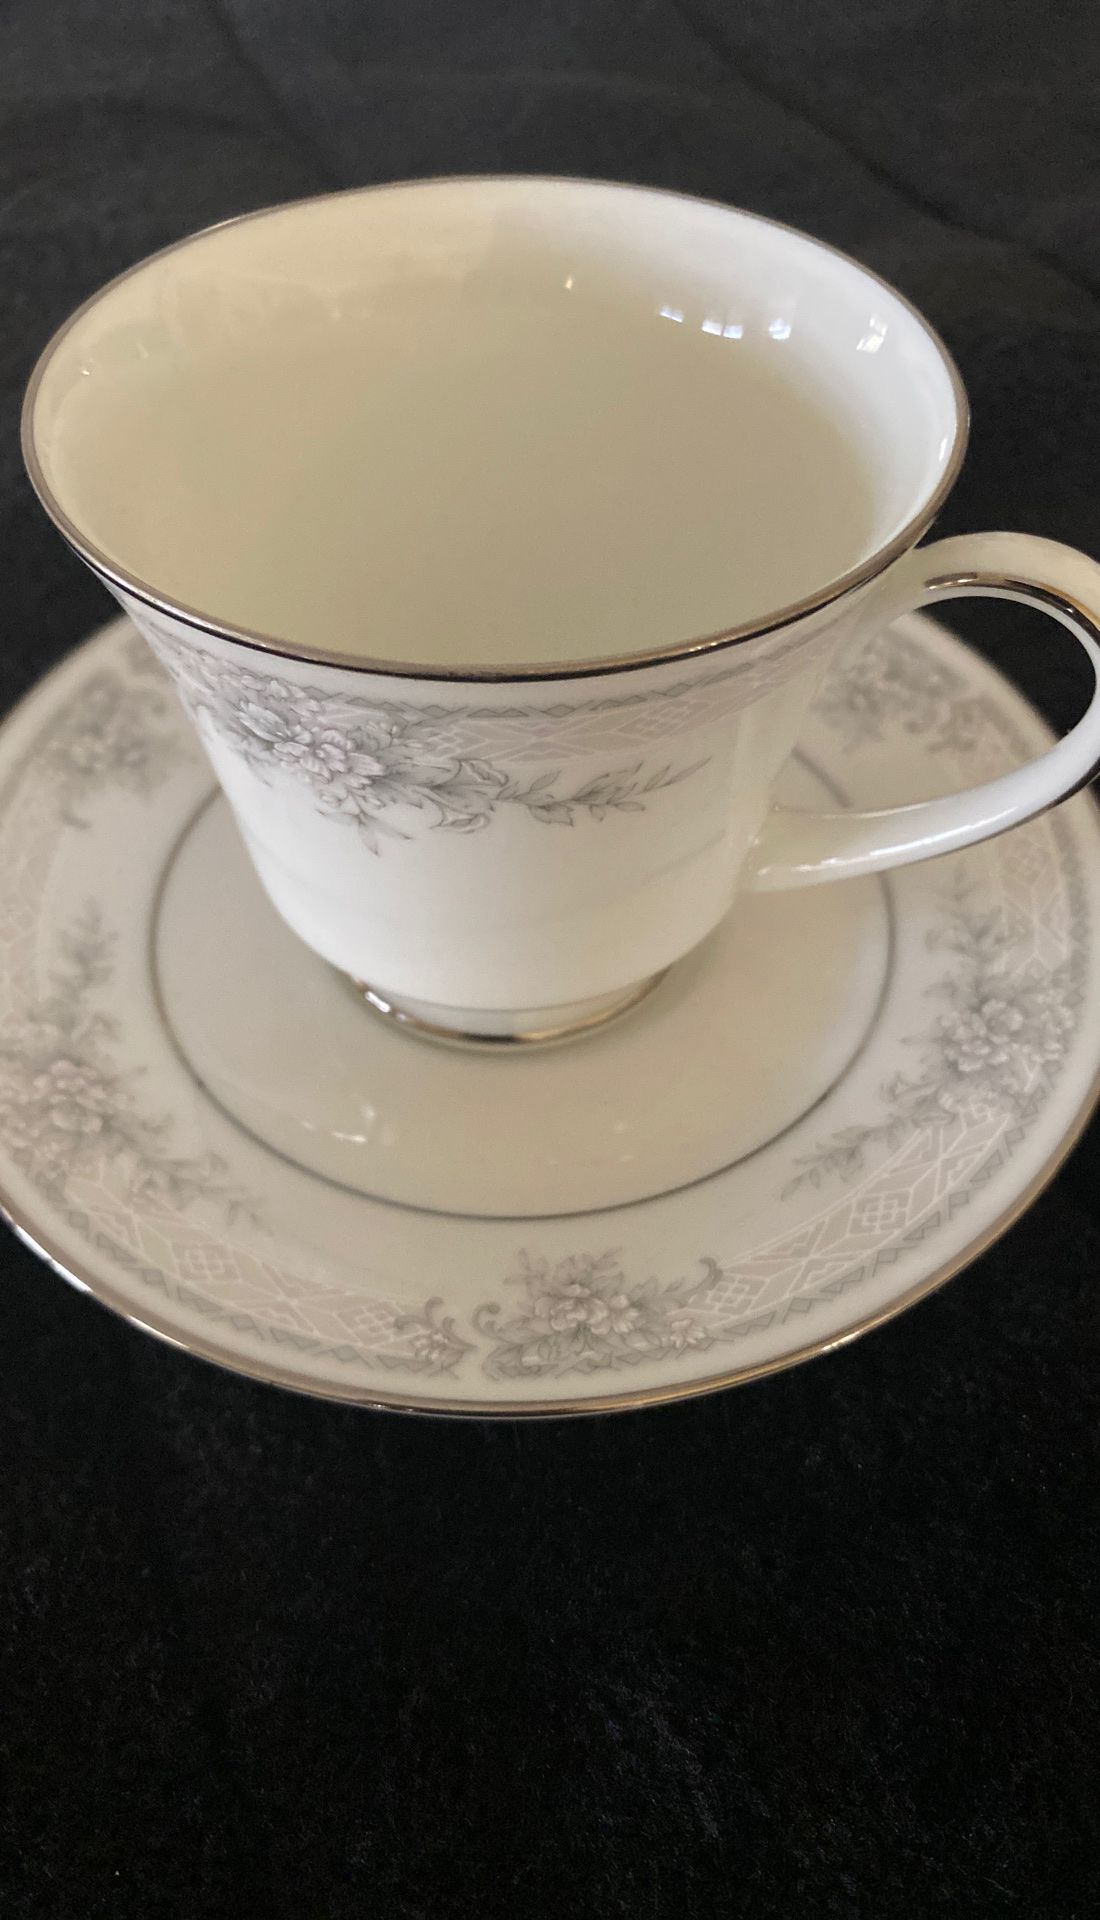 Noritake 62 pieces - 5 piece serving for 12 with creamer and sugar set